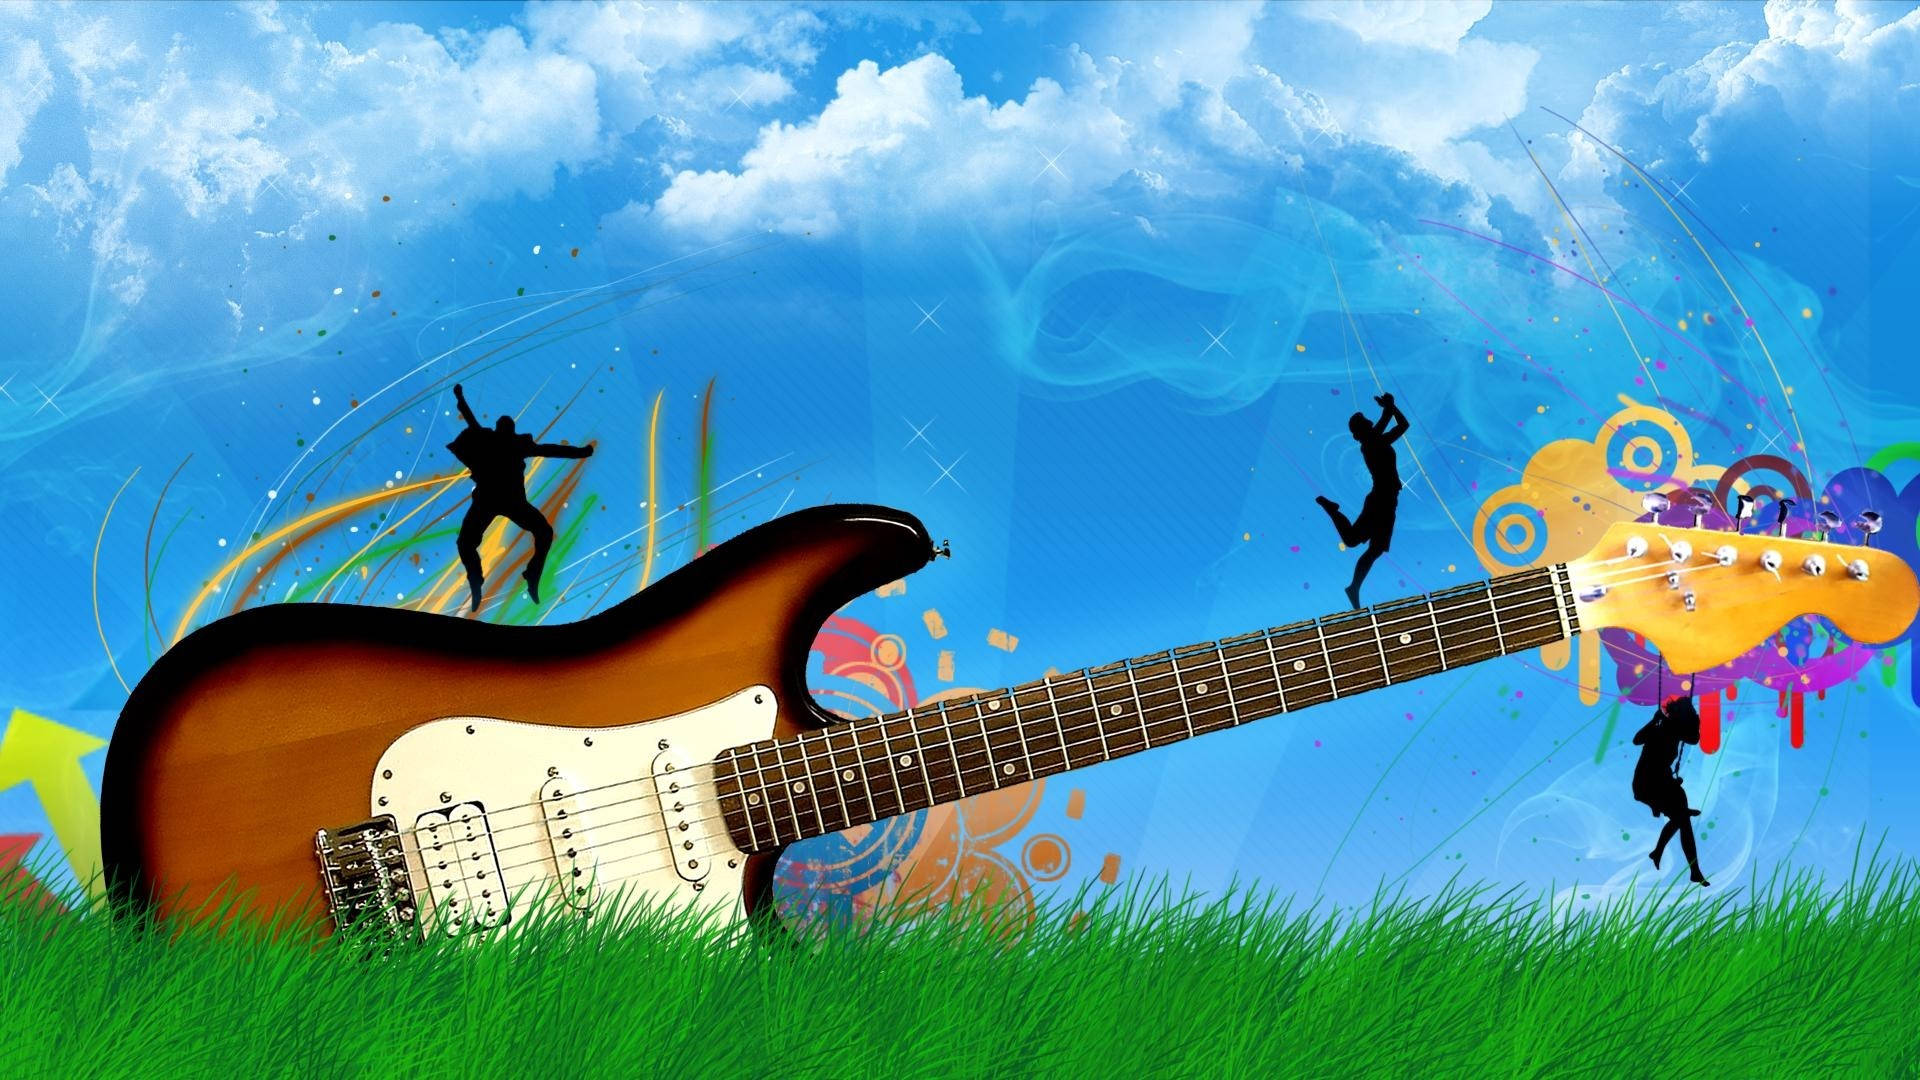 Cute Music Electric Guitar With Silhouettes